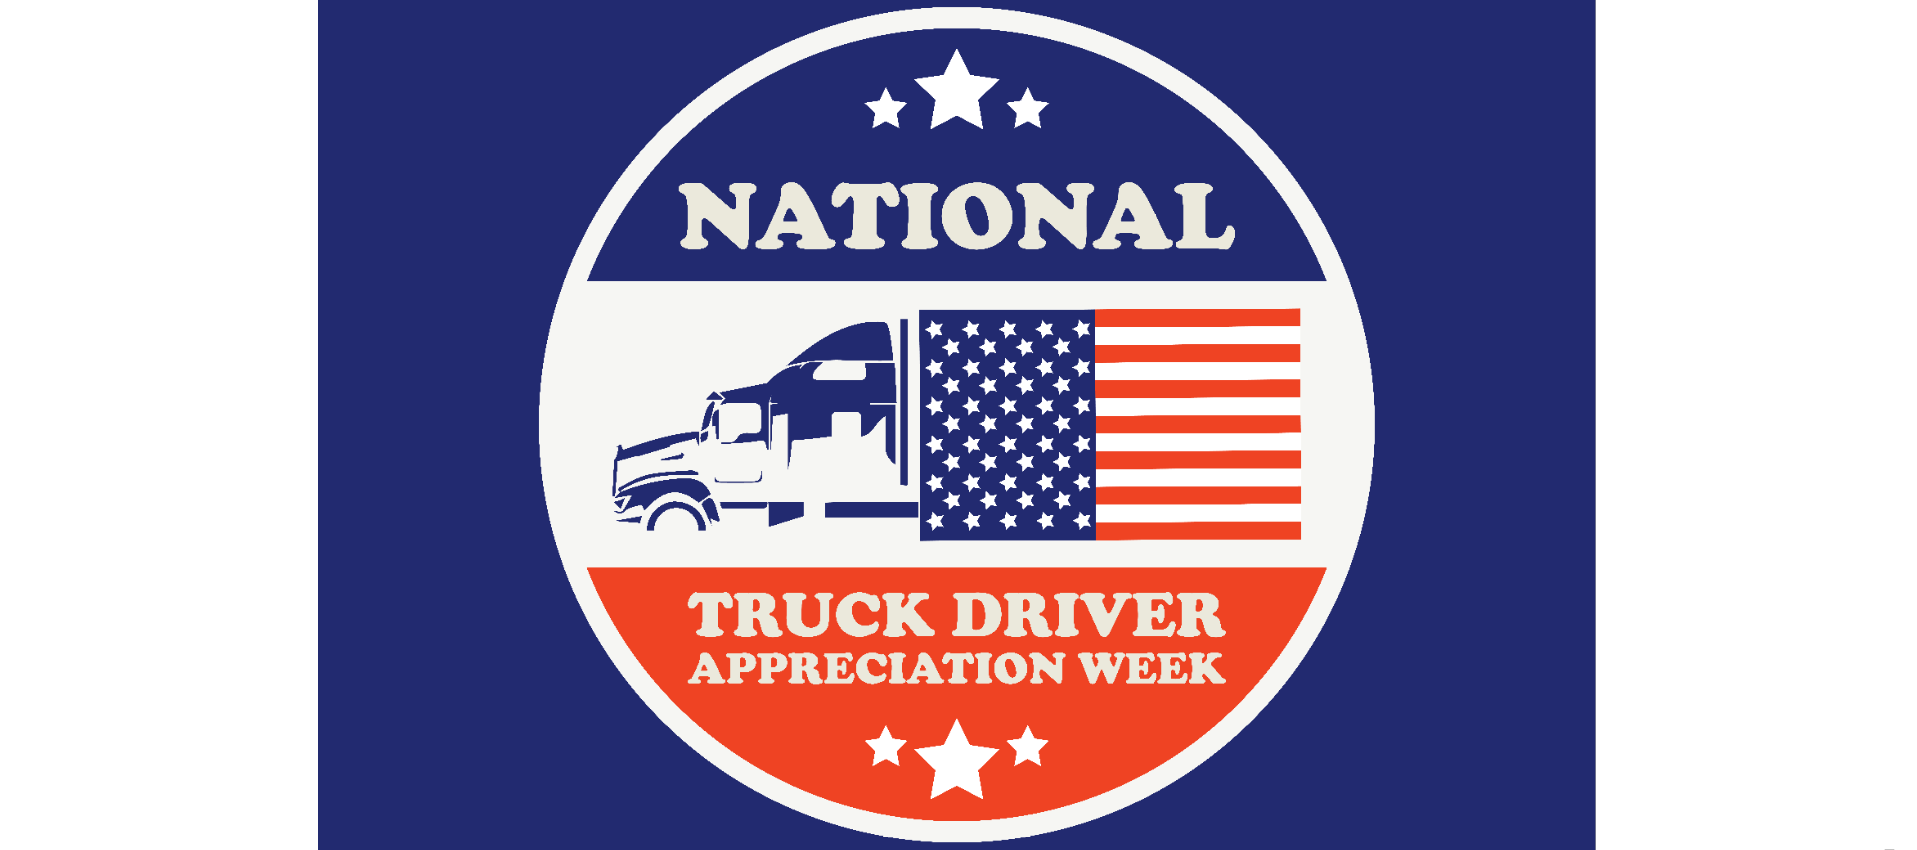 Truck Driver Appreciation Week / What You Should Do For Truck Driver